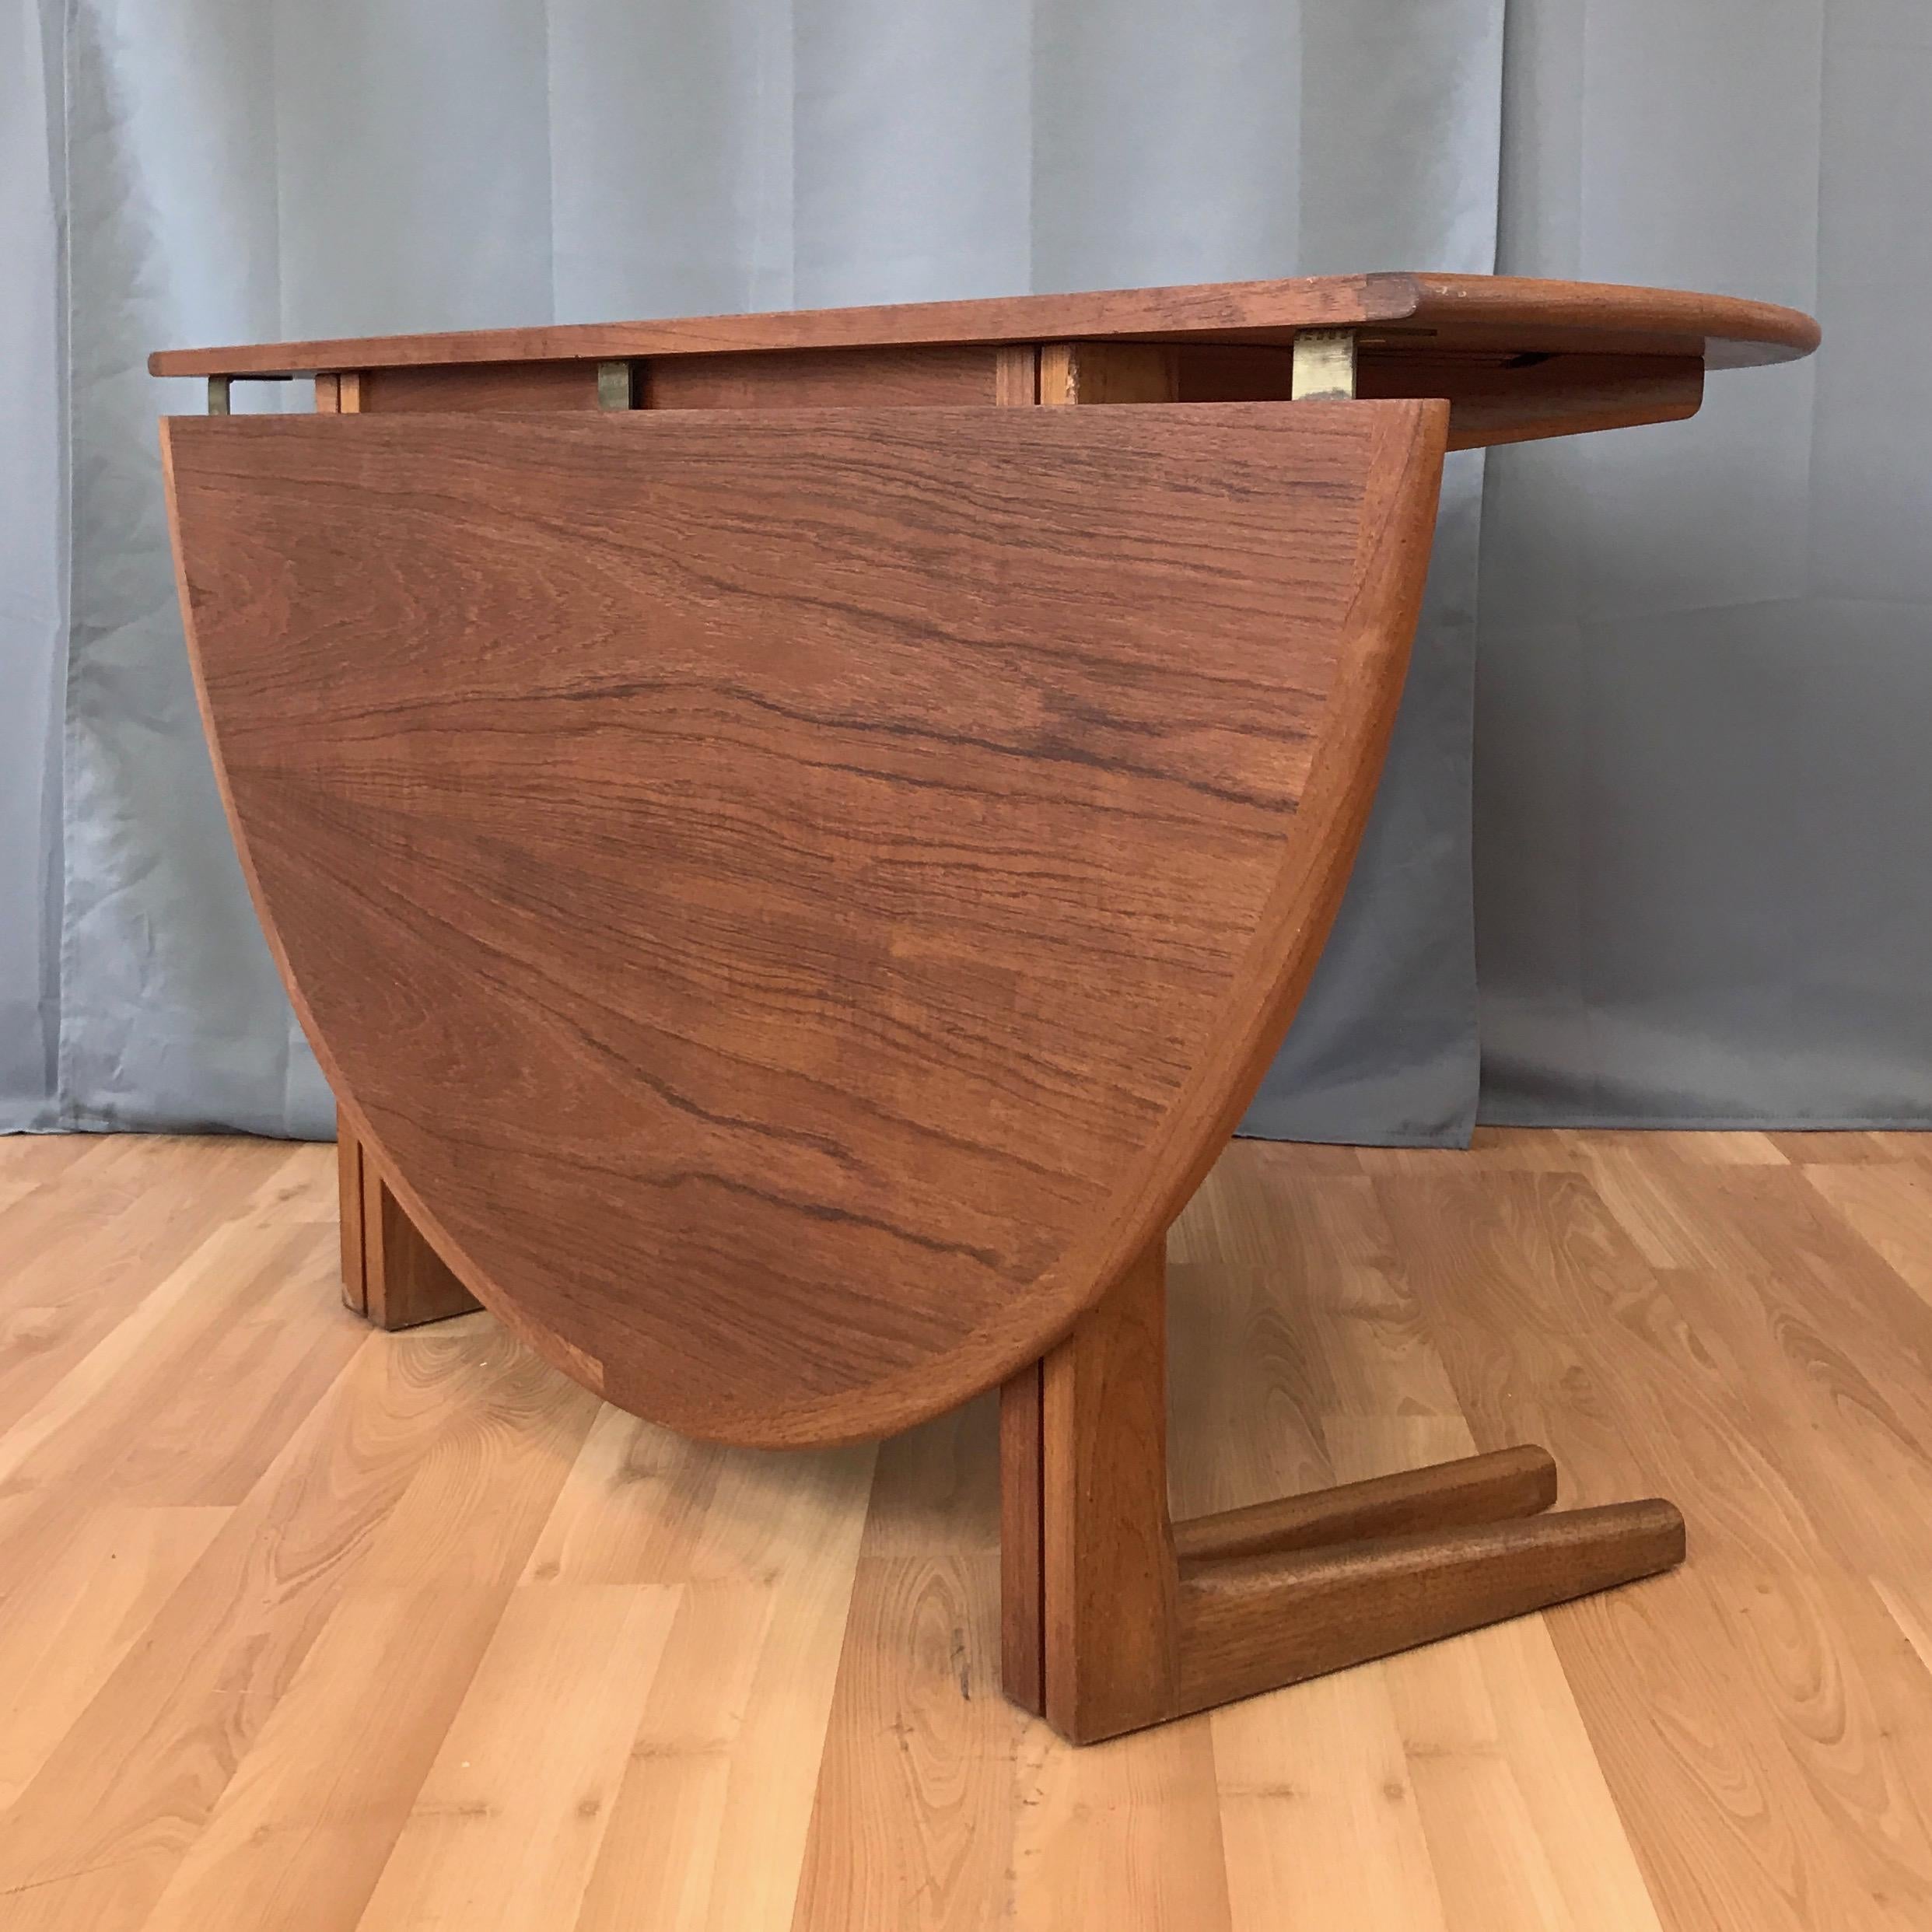 A very handsome and clean 1970s Danish round drop-leaf teak dining table.

Appealingly idiosyncratic design features a top comprised of two slightly unequally sized leaves with bookmatched veneer and a solid bullnose edge. On a broadly supported